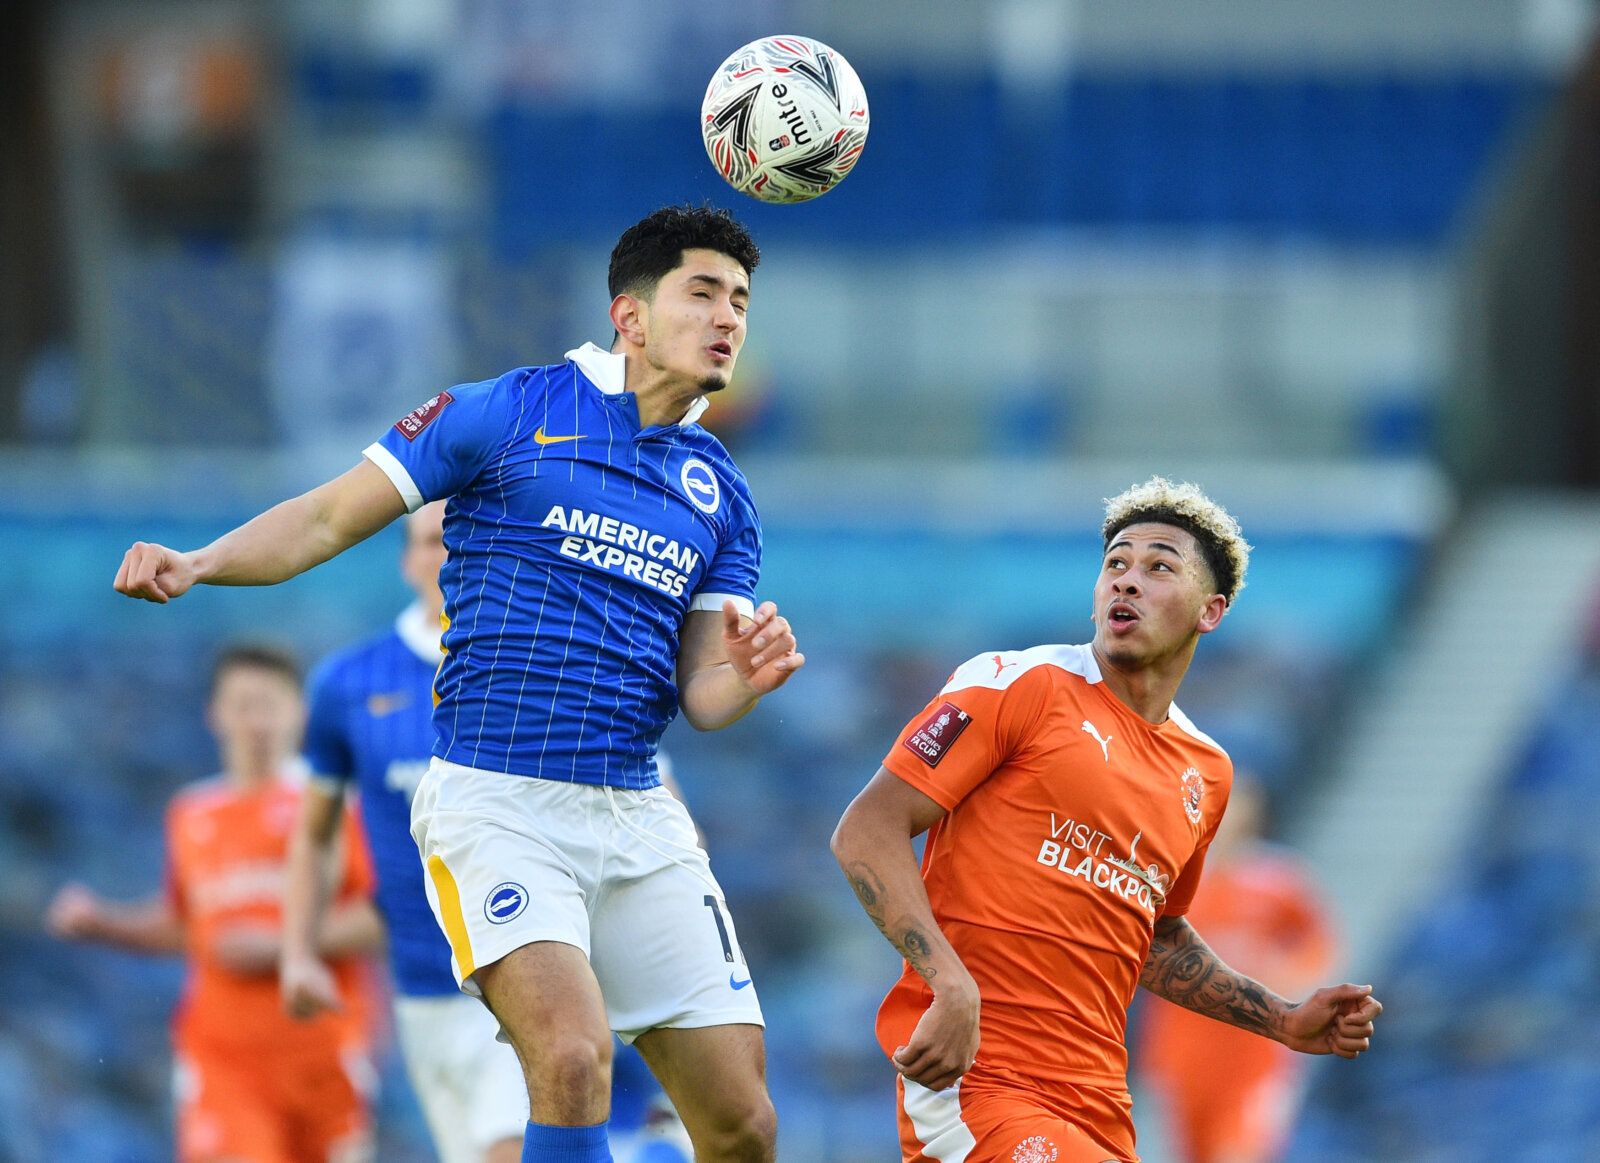 Soccer Football - FA Cup - Fourth Round - Brighton &amp; Hove Albion v Blackpool - The American Express Community Stadium, Brighton, Britain - January 23, 2021 Brighton &amp; Hove Albion's Steven Alzate in action with Blackpool's Jordan Lawrence-Gabriel Pool via REUTERS/Glyn Kirk